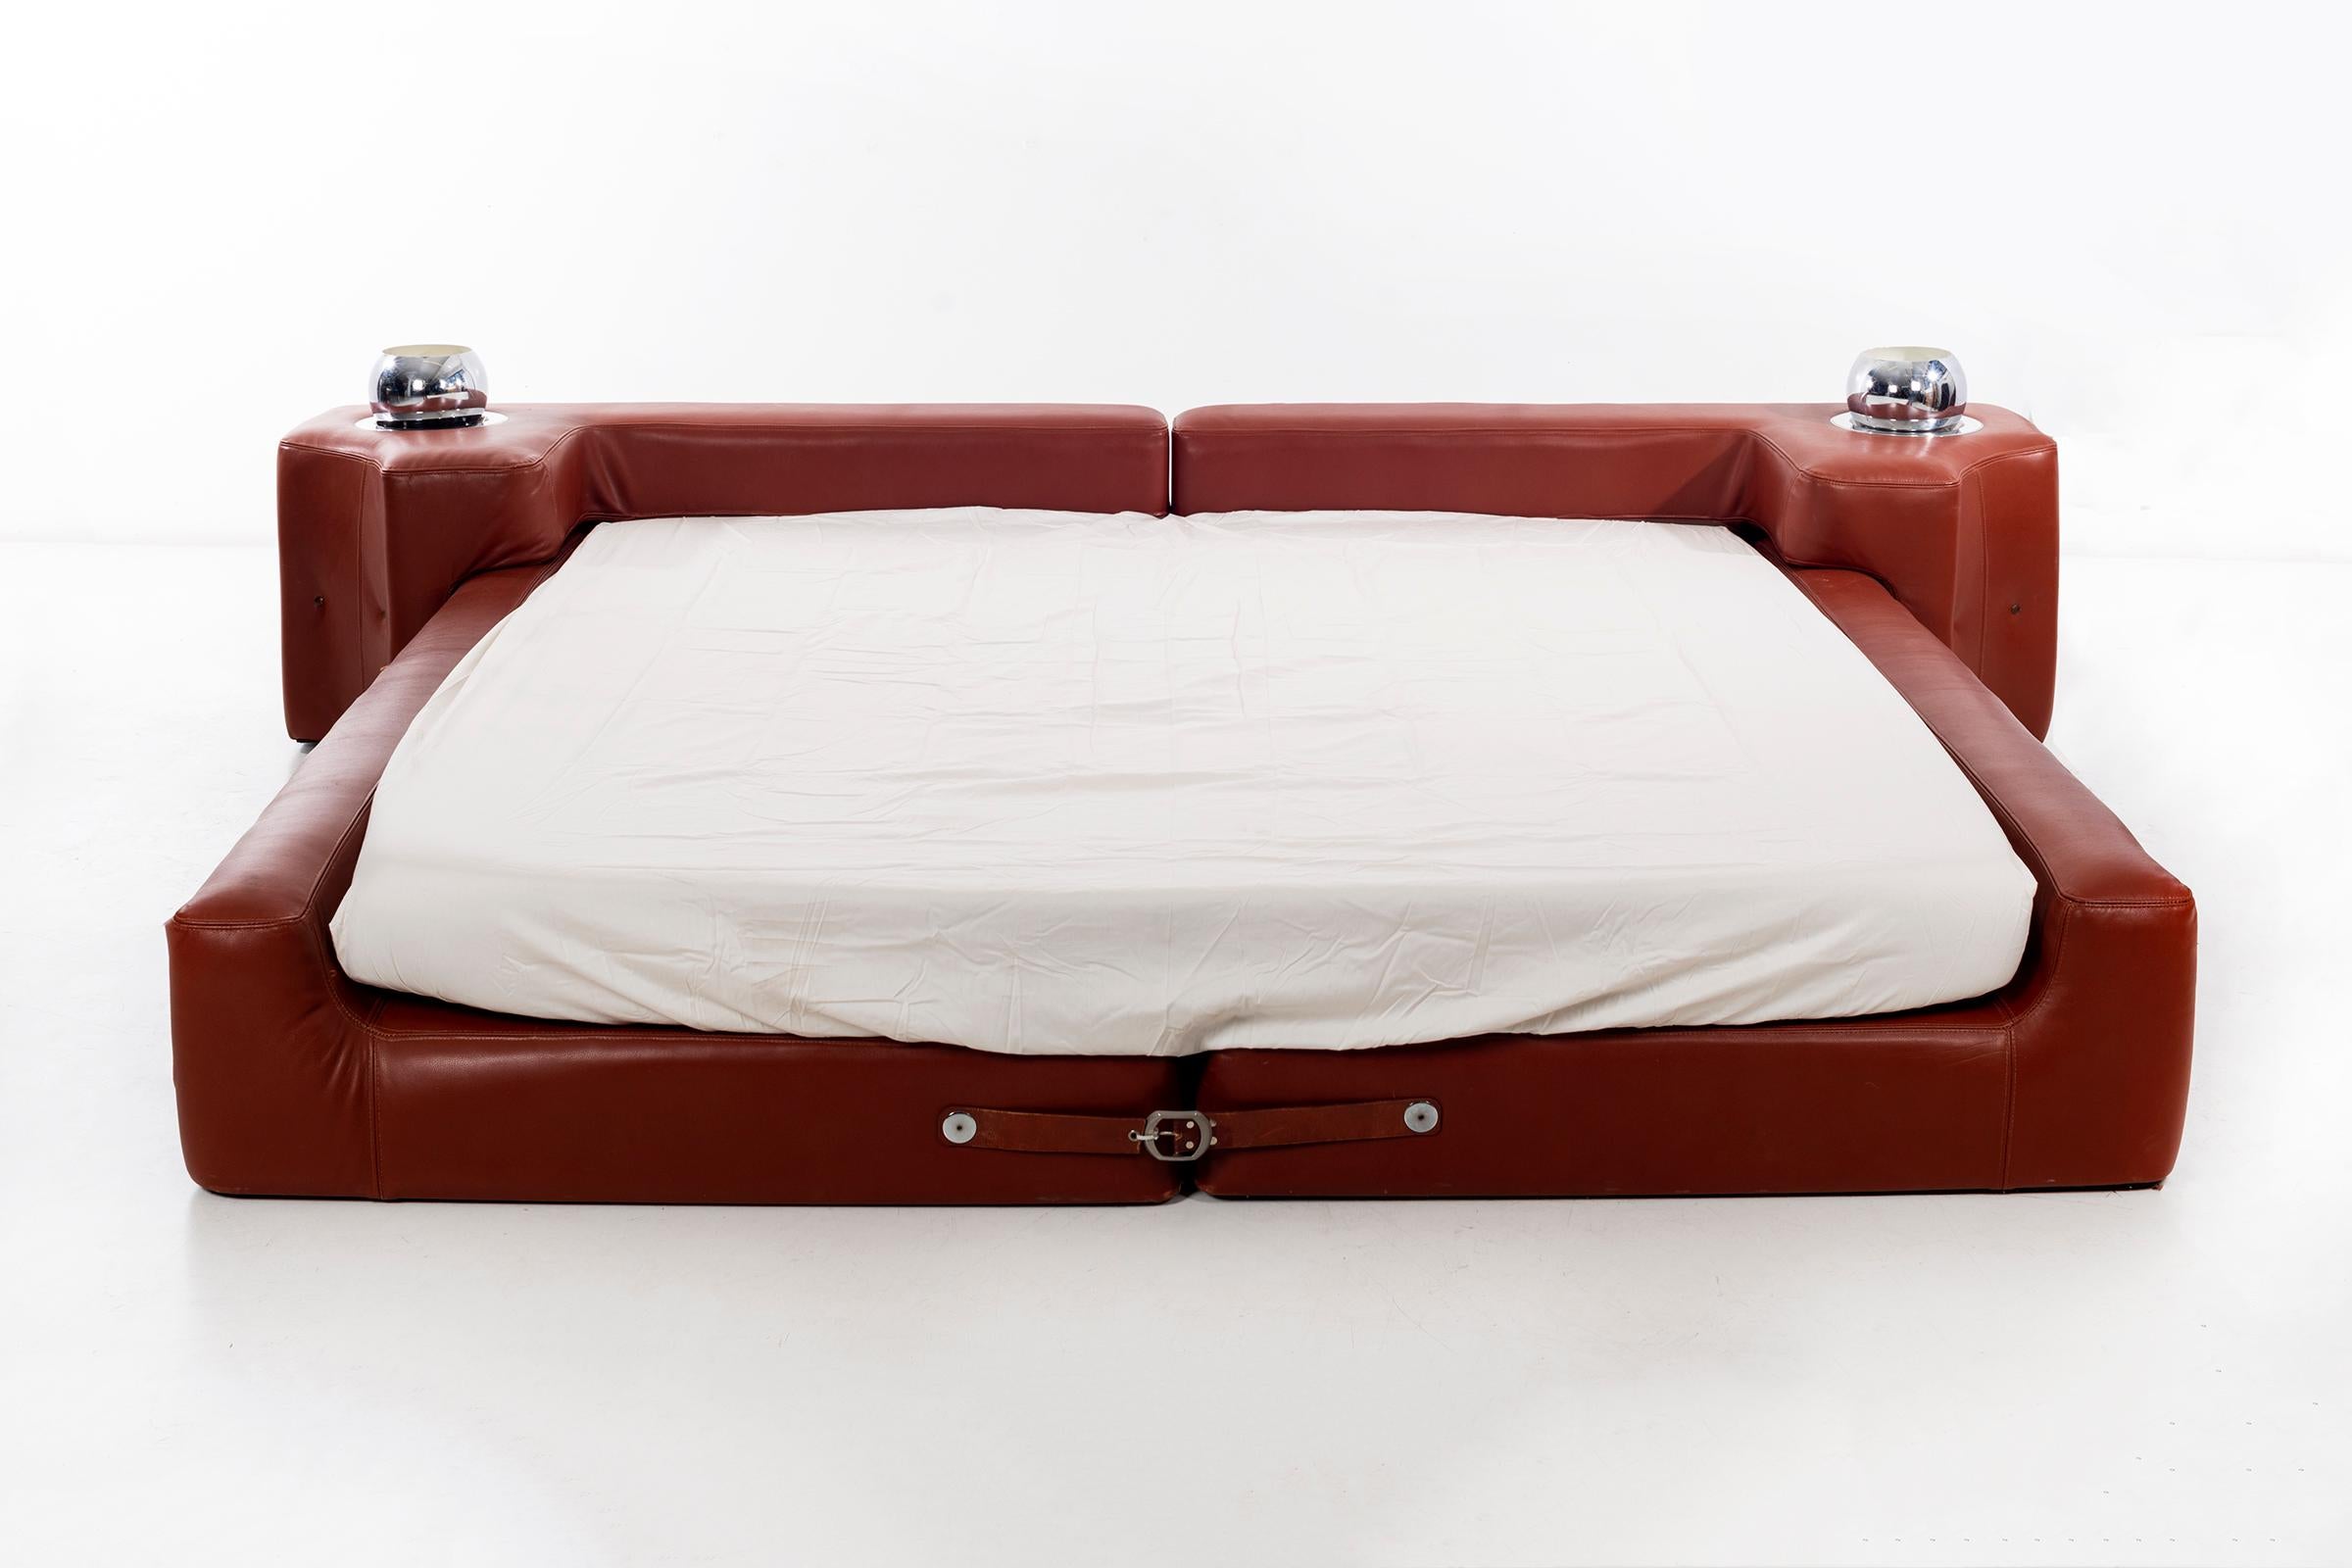 Pace collection leather bed by Guido Faleschini for Mariani. Features two built in adjustable chrome lights on headboard surface. Leather strap detailing at foot of bed.